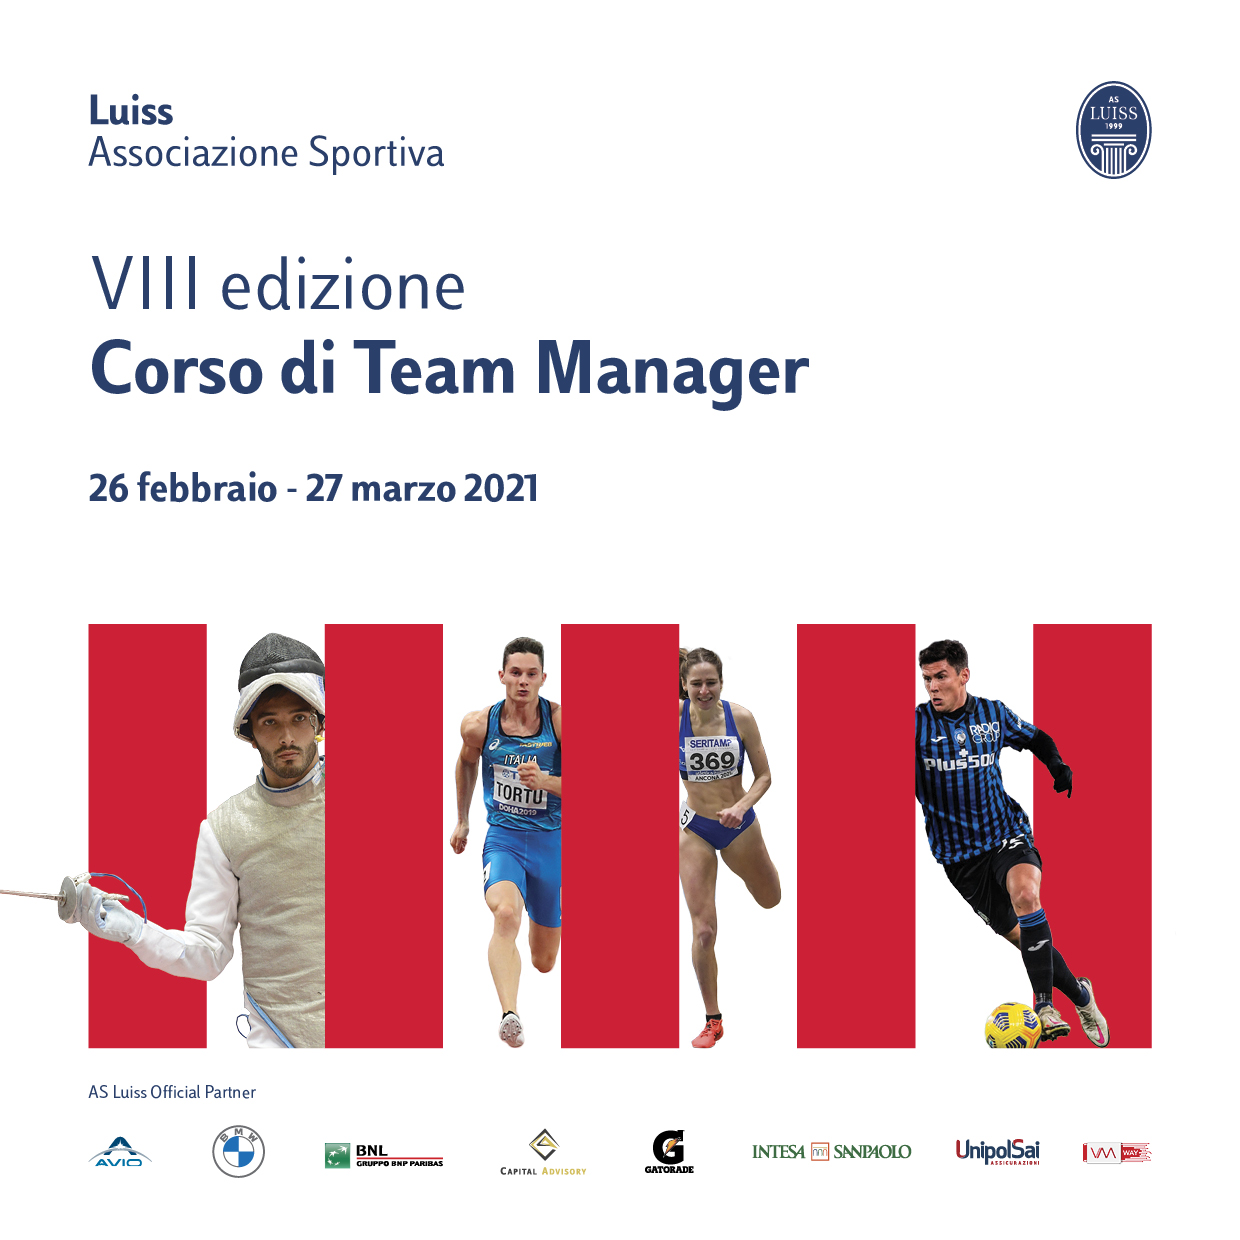 20210215_AS_Luiss_STD_Team Manager_V1